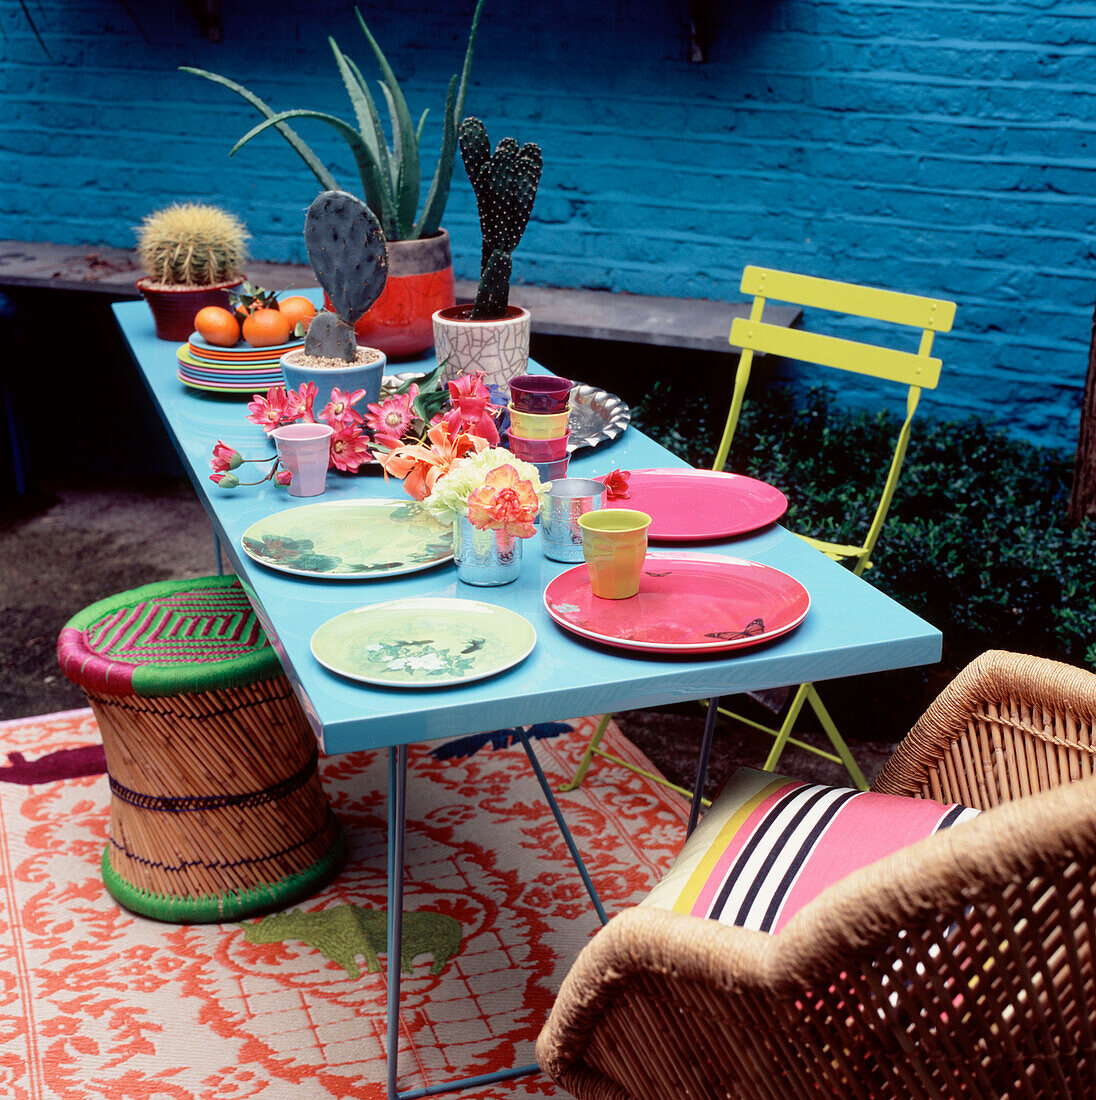 Colourful table setting in a small garden